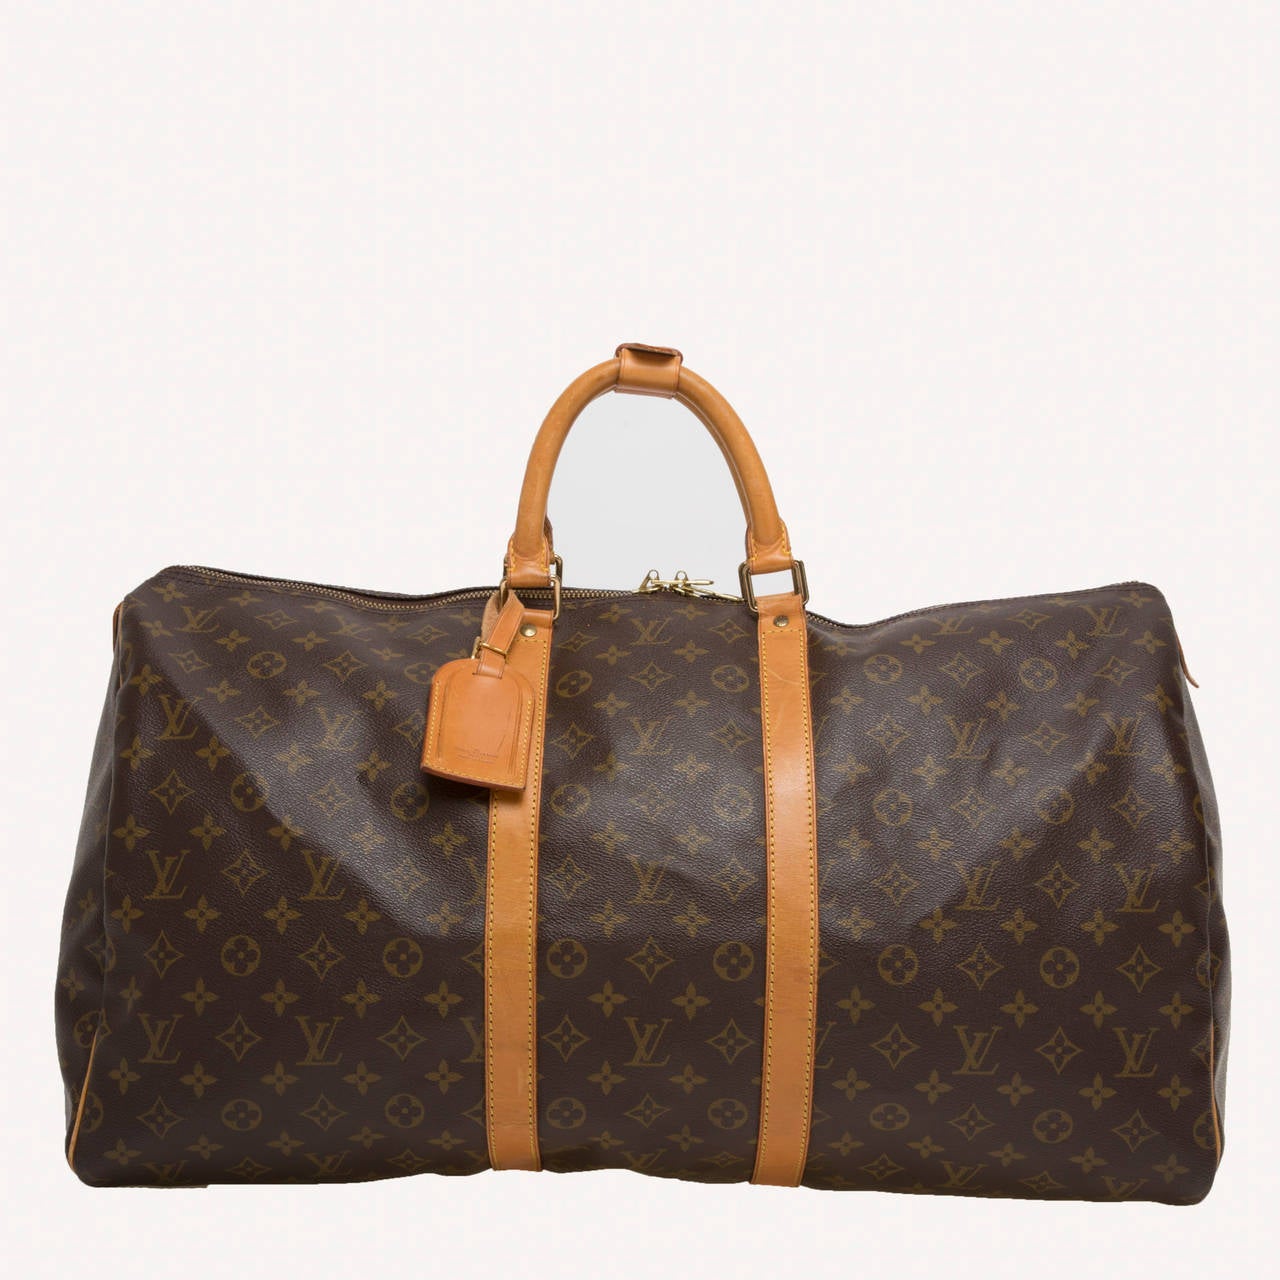 This authentic Louis Vuitton Keepall 55 features the brand's timeless travel bags in monogram canvas print. Its roomy and lightweight interior makes it the perfect travel companion. This duffle accented with brown leather trims comes with a name tag